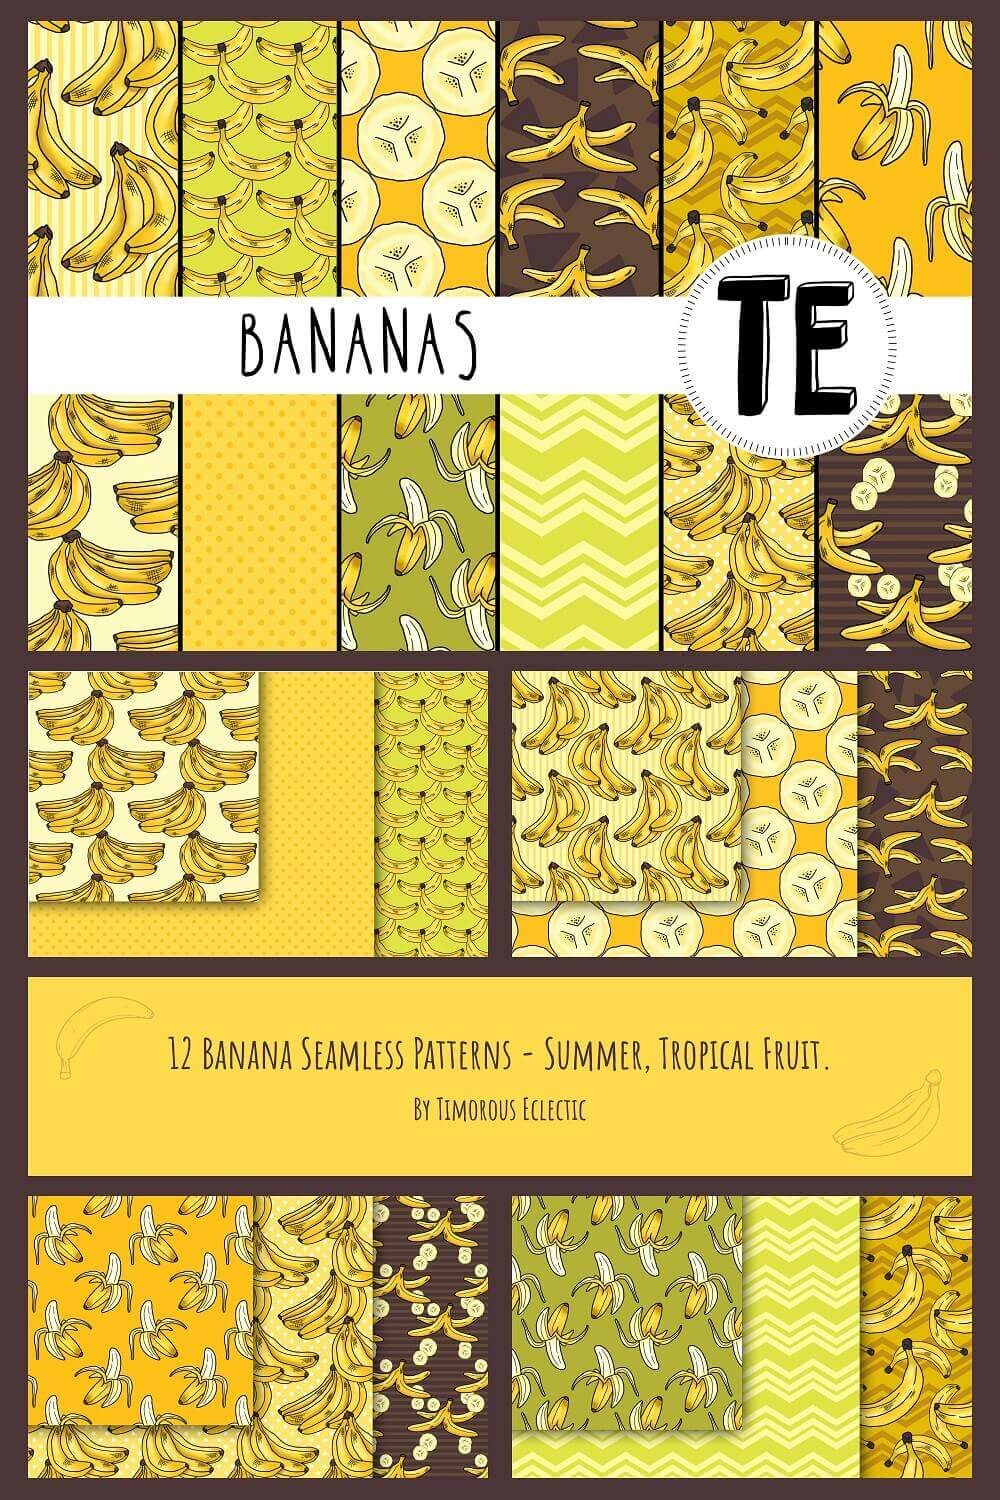 Bananas patterns on the light and dark backgrounds.